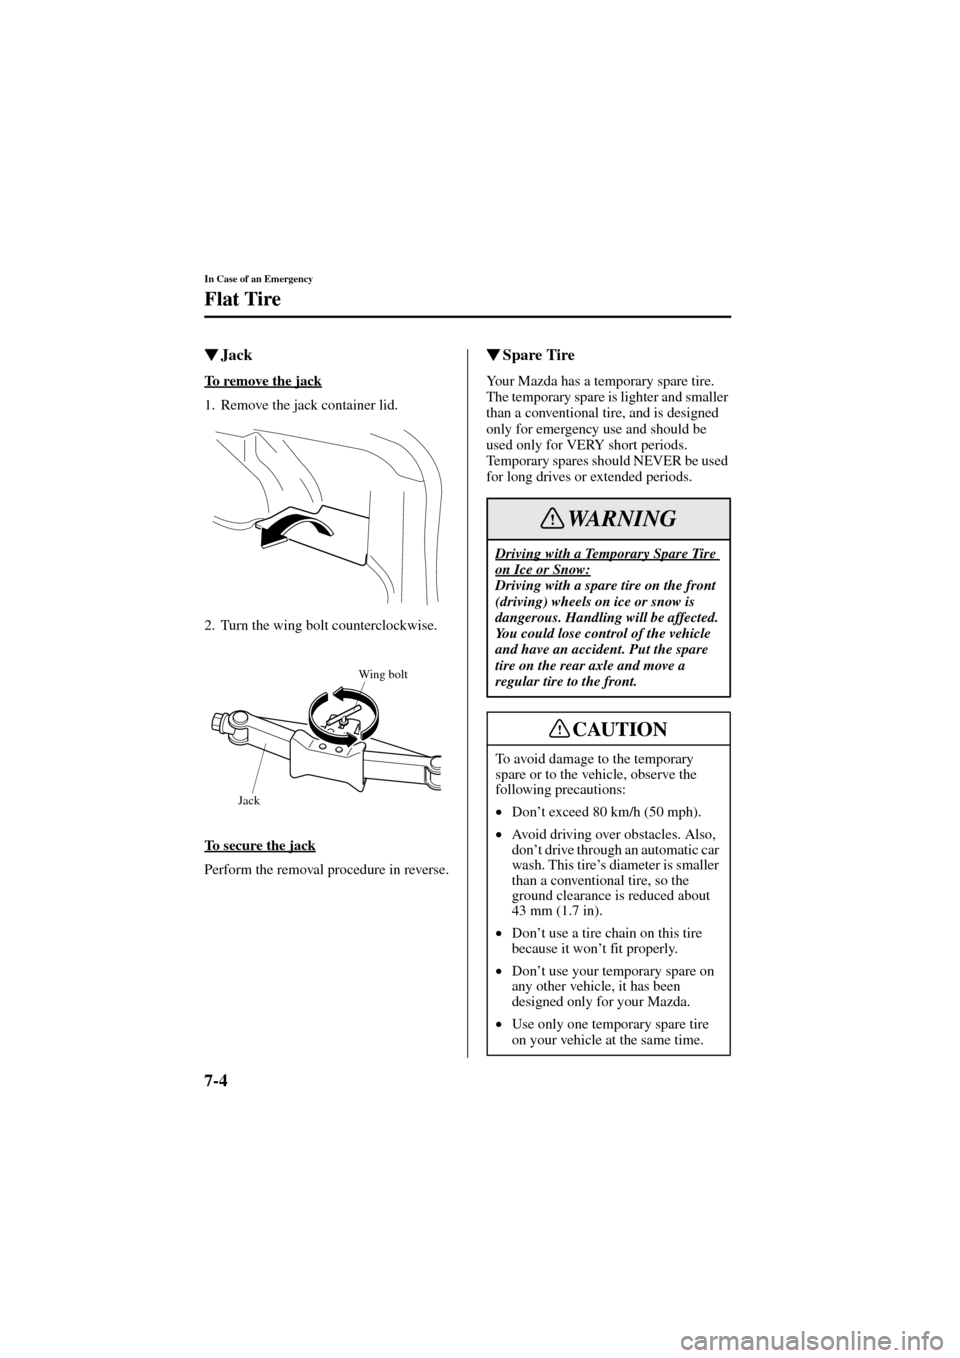 MAZDA MODEL 6 2004  Owners Manual (in English) 7-4
In Case of an Emergency
Flat Tire
Form No. 8R29-EA-02I
Jack
To remove the jack
1. Remove the jack container lid.
2. Turn the wing bolt counterclockwise.
To secure the jack
Perform the removal pro